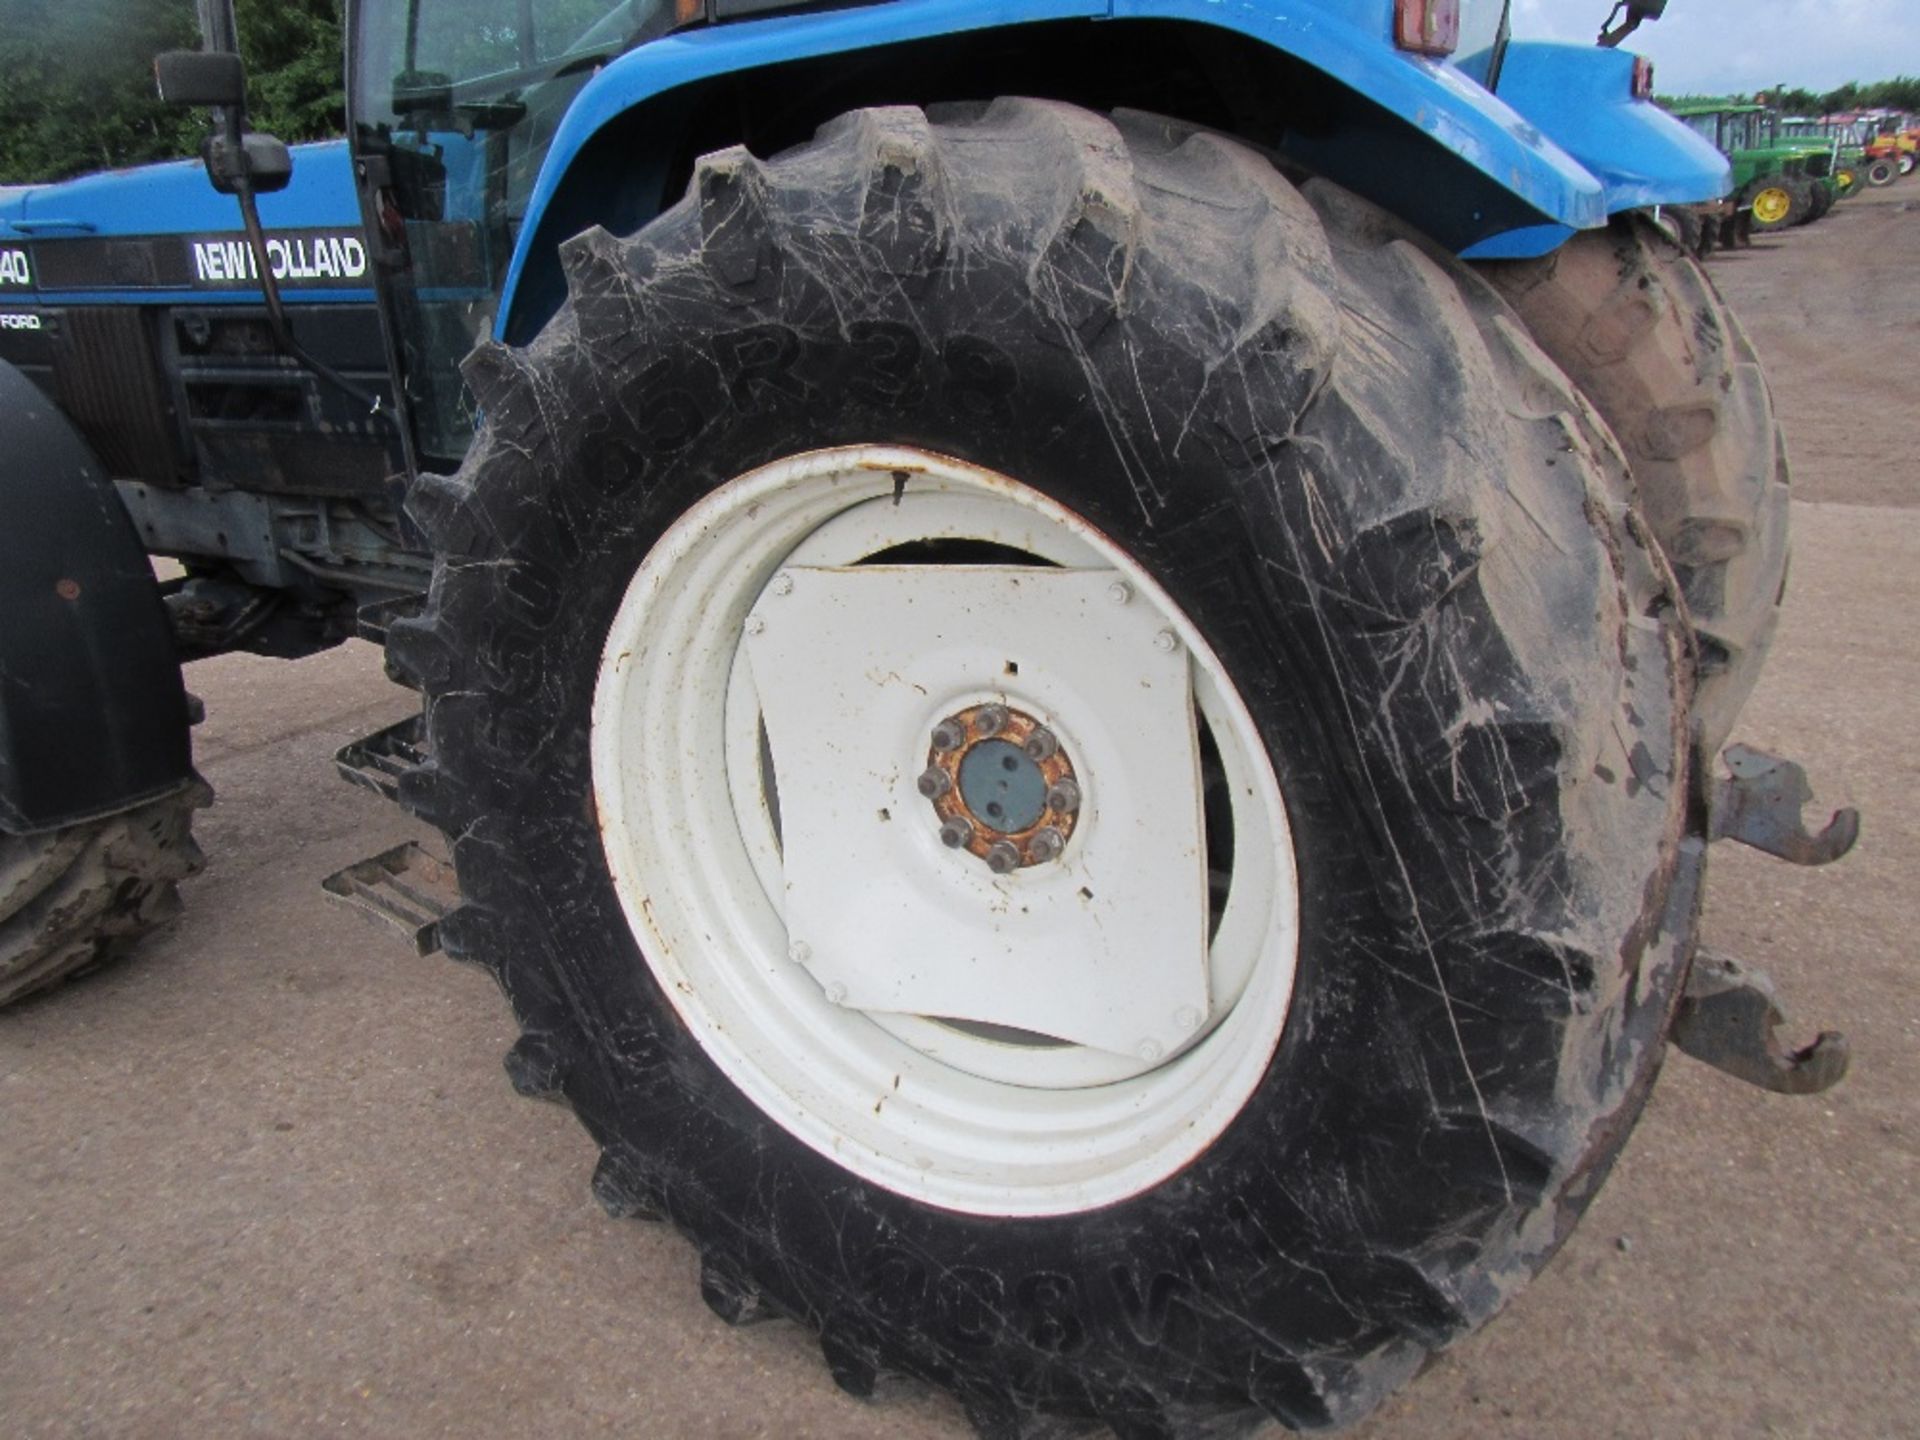 New Holland 8340 SLE 4wd Tractor. Reg. No. N243 SCN Ser. No. 025324B - Image 10 of 20